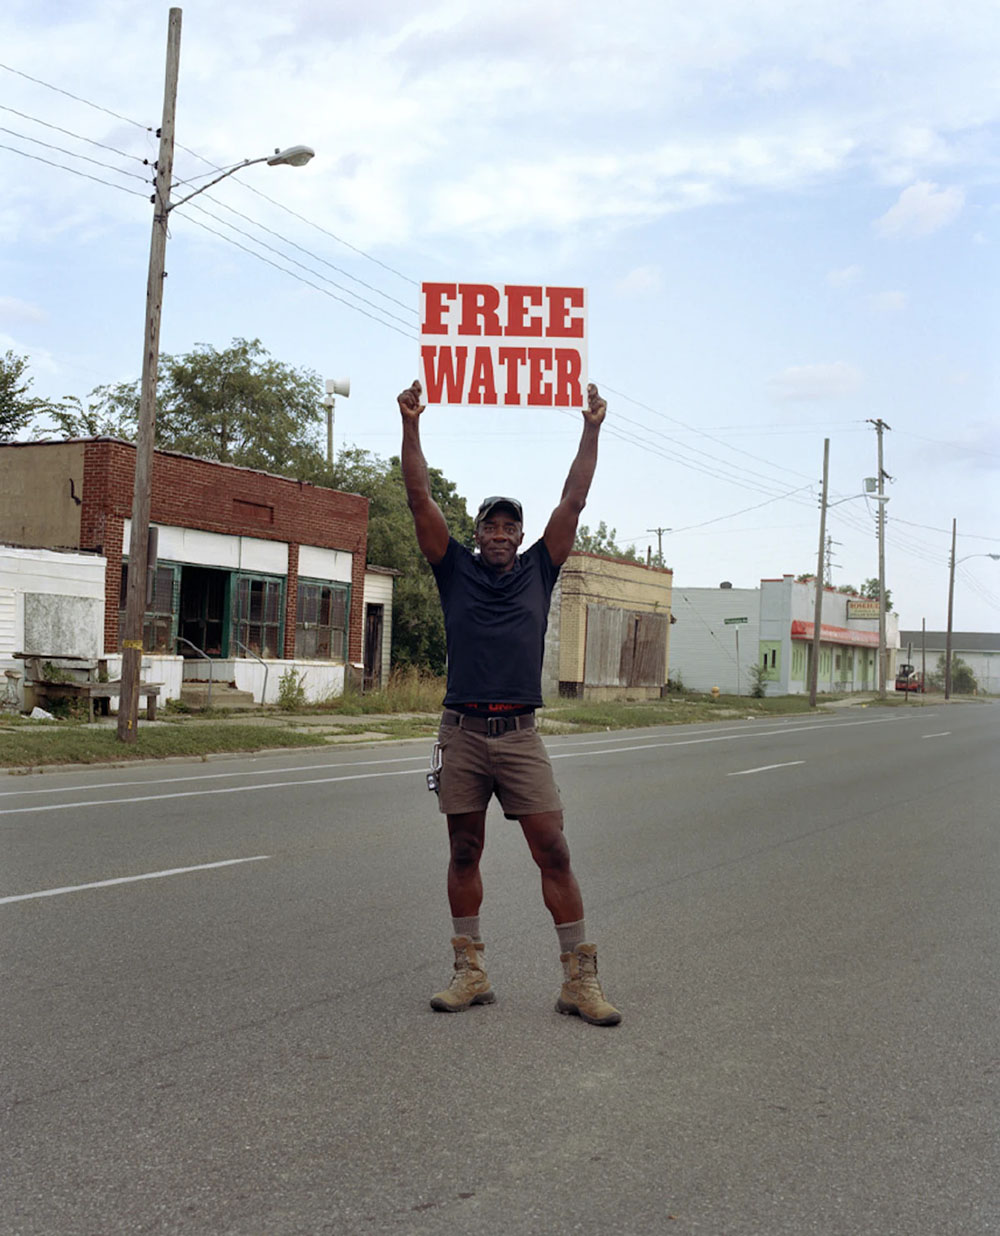 Moses West Holding a “Free Water” Sign on North Saginaw Street Between East Marengo Avenue and East Pulaski Avenue, Flint, Michigan, 2019. ©2022 LaToya Ruby Frazier. Courtesy of the artist and Gladstone Gallery.